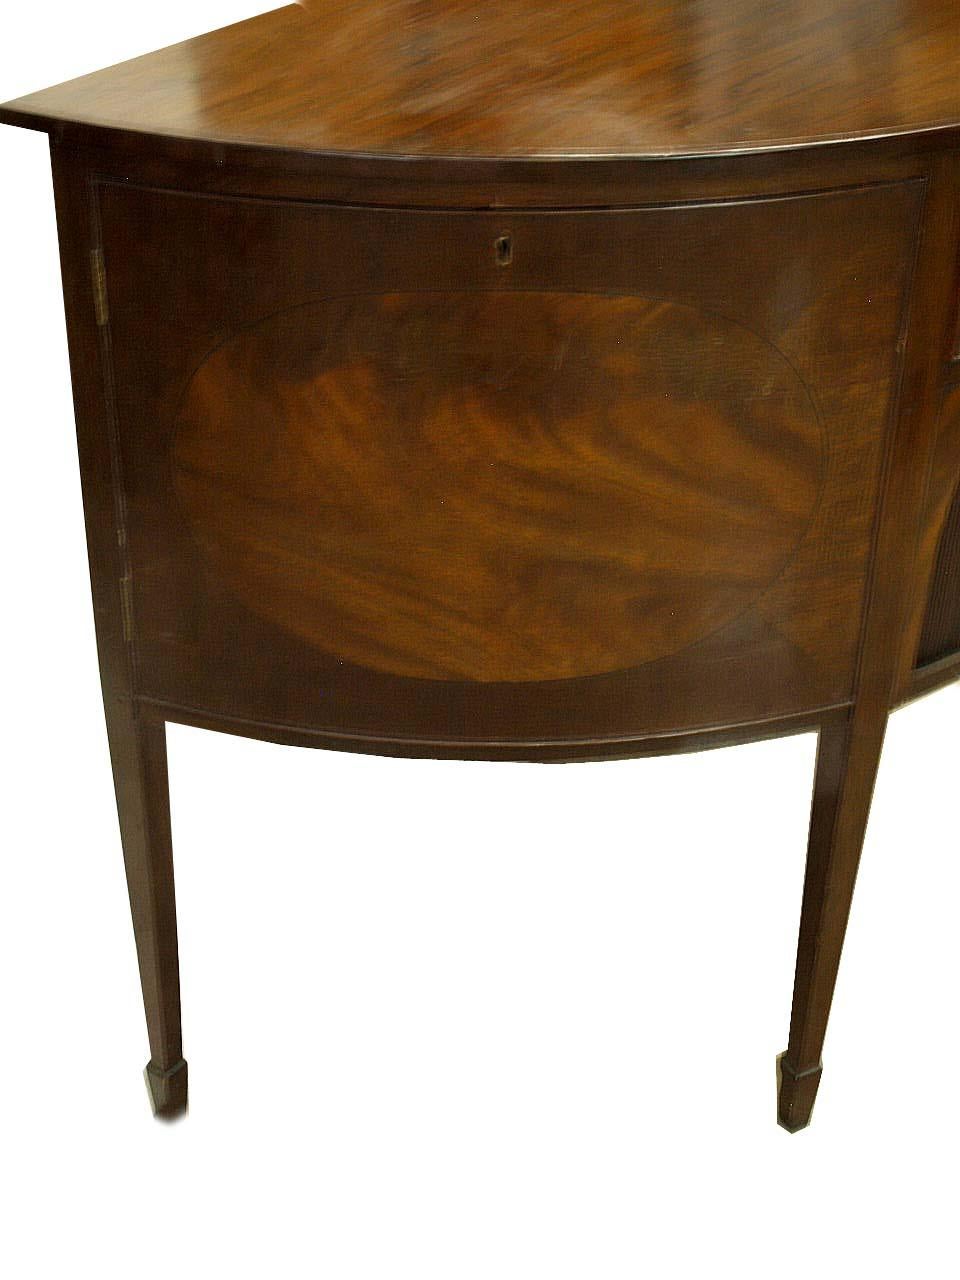 English Hepplewhite demi lune sideboard, the top with beautiful grain similar to what is referred to in England as ''plum pudding'', the doors with an oval flame mahogany center surrounded by cross banded mahogany , open interior behind each door.